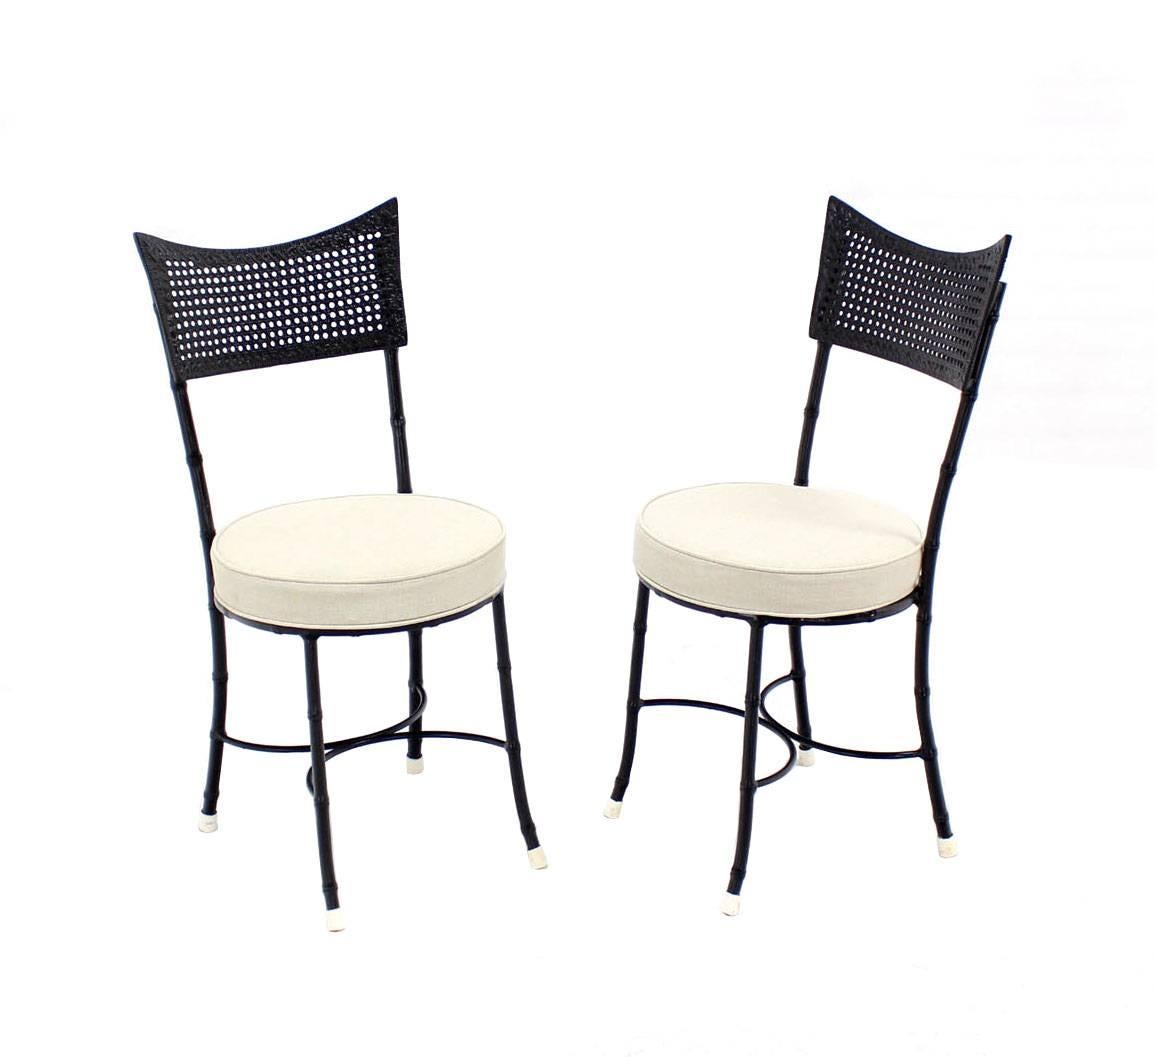 Four Cast Aluminum Faux Bamboo and Cane Round Seat Chairs 3